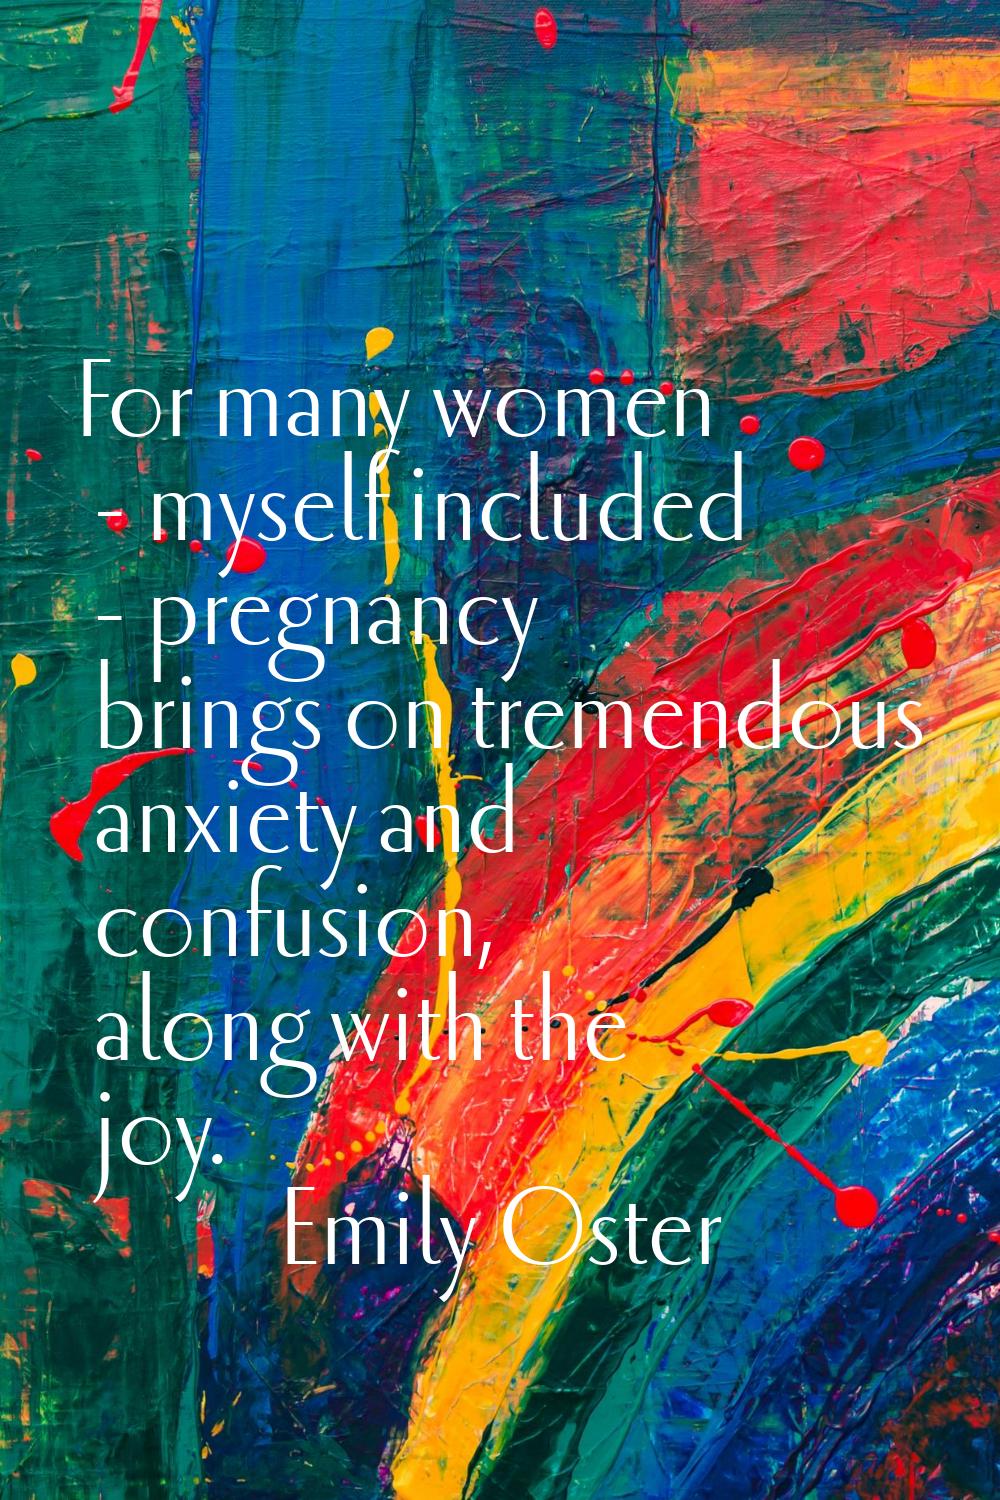 For many women - myself included - pregnancy brings on tremendous anxiety and confusion, along with